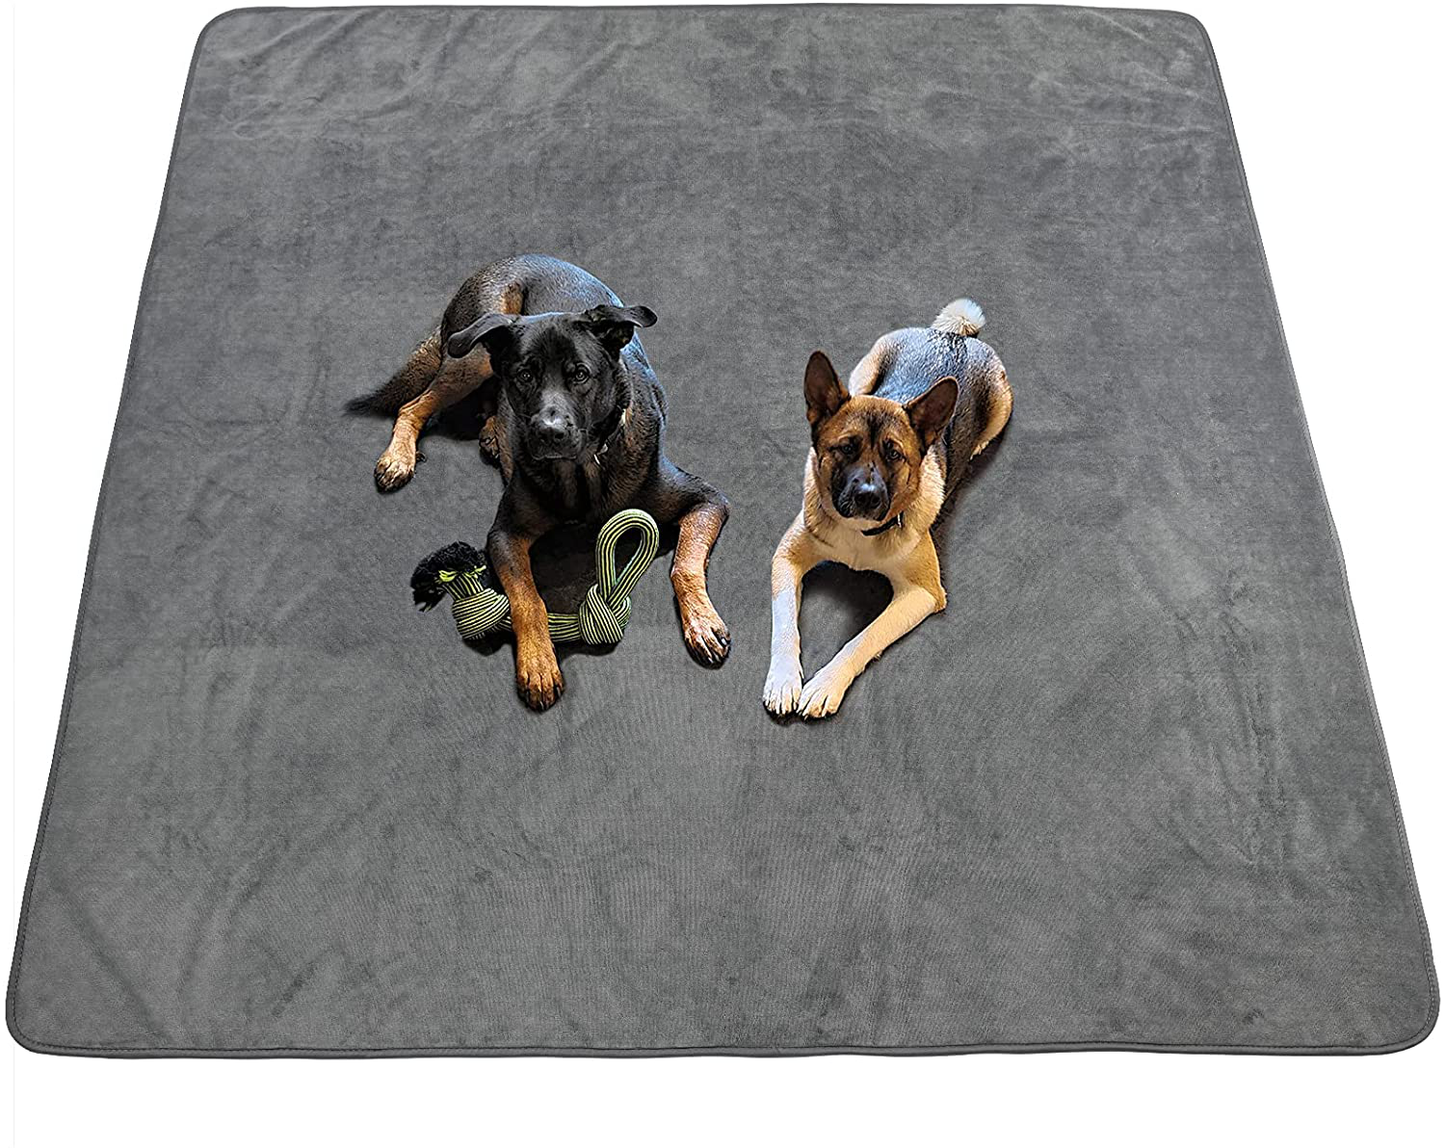 Dog Pee Pad Washable-Extra Large 72X72/65X48 Instant Absorb Training Pads Non-Slip Pet Playpen Mat Waterproof Reusable Floor Mat for Puppy/Senior Dog Whelping Incontinence Housebreaking